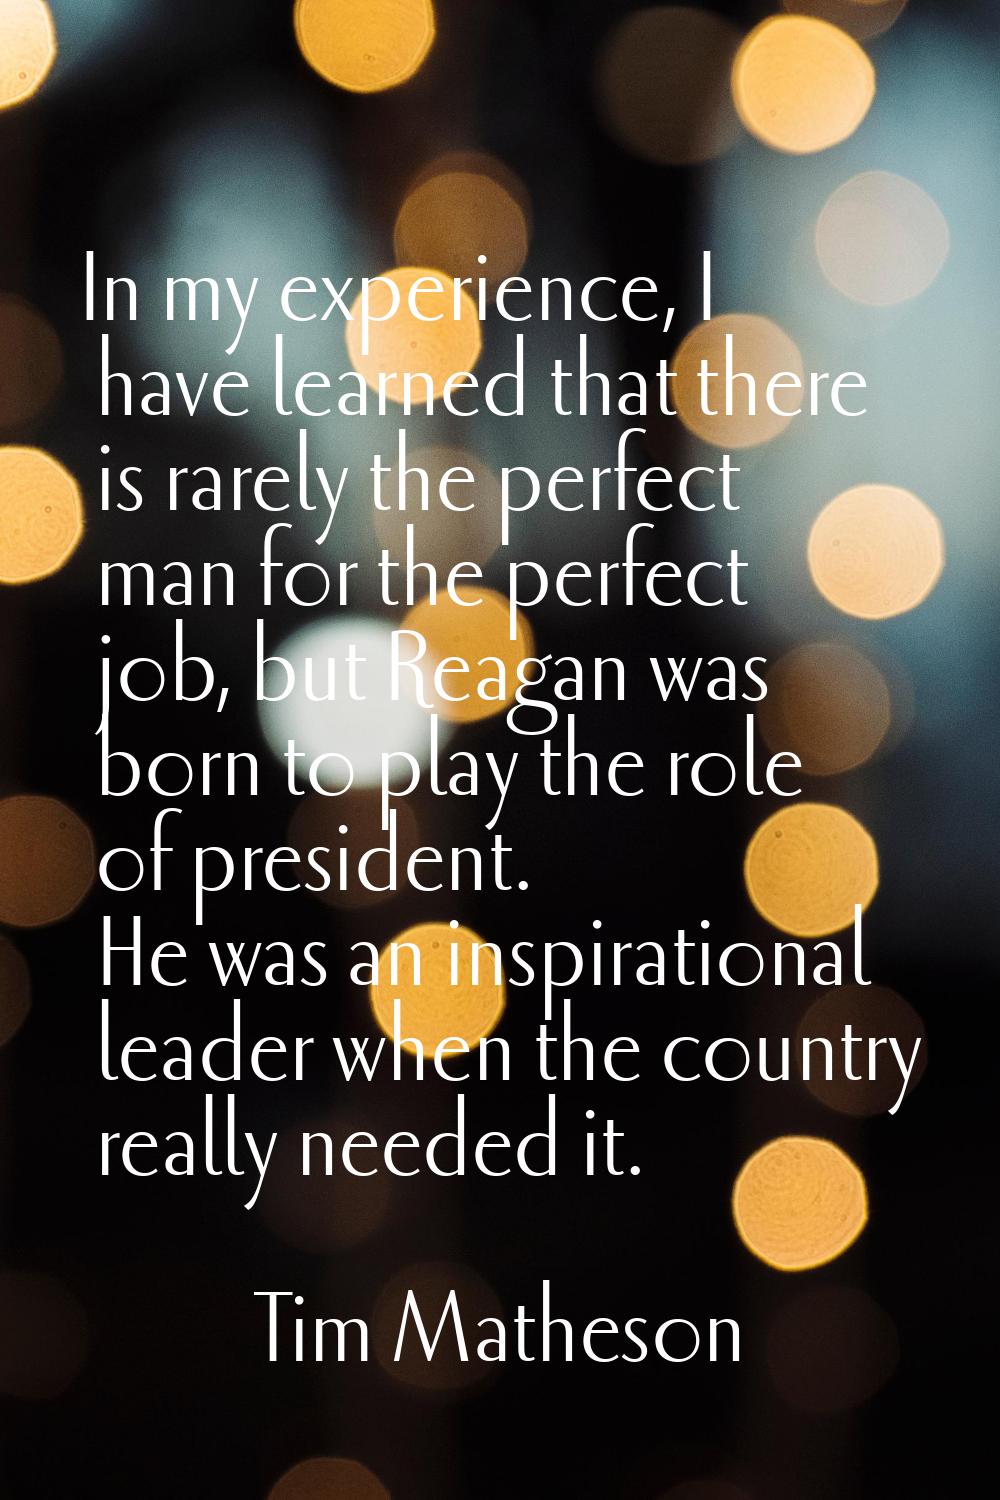 In my experience, I have learned that there is rarely the perfect man for the perfect job, but Reag